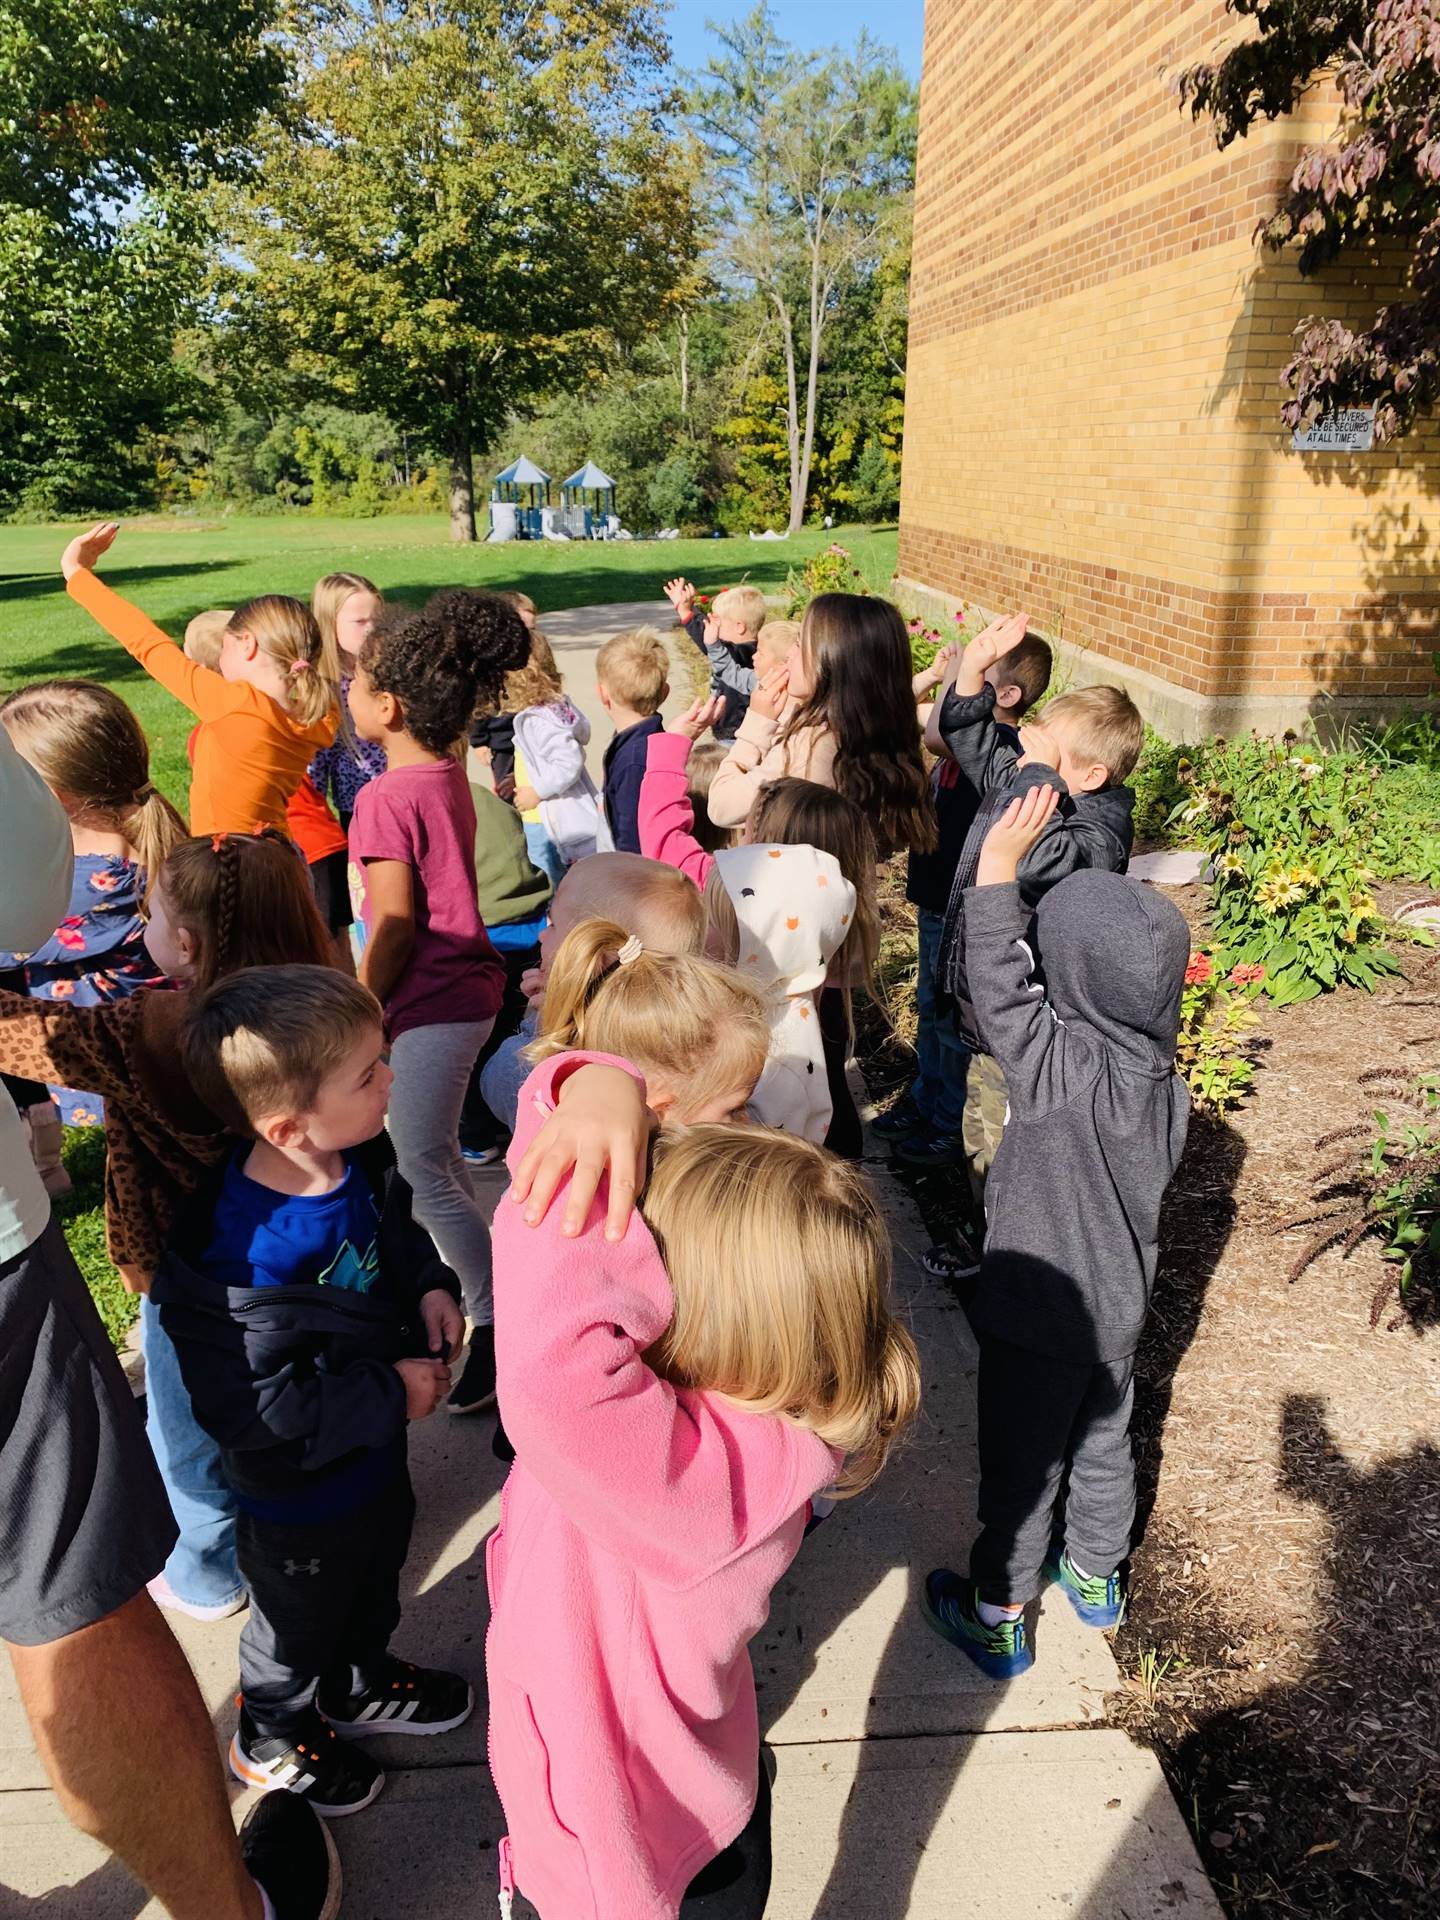 students waving goodbye to released butterflies.